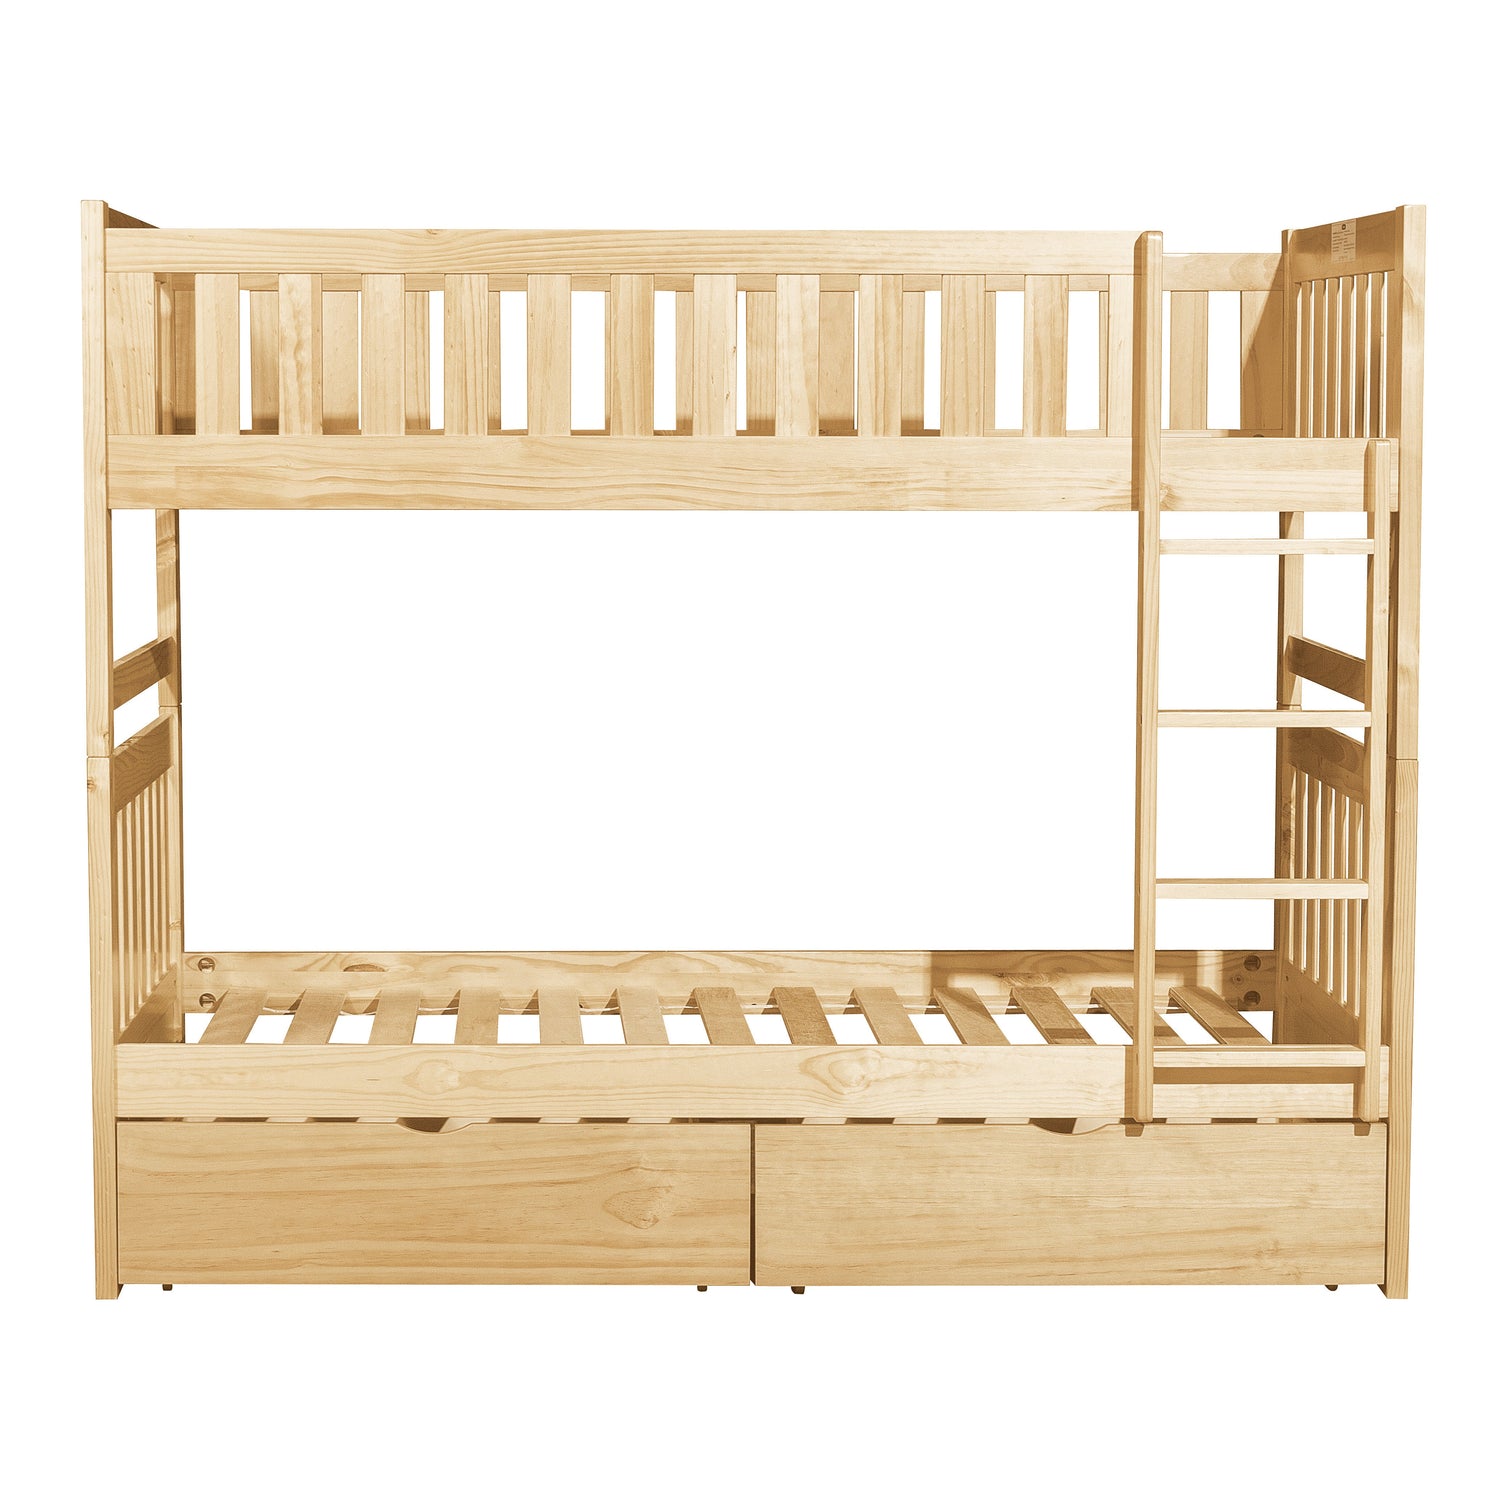 Bartly Pine Twin/Twin Bunk Bed with Storage Boxes - SET | B2043-1 | B2043-2 | B2043-SL | B2043-T - Bien Home Furniture &amp; Electronics